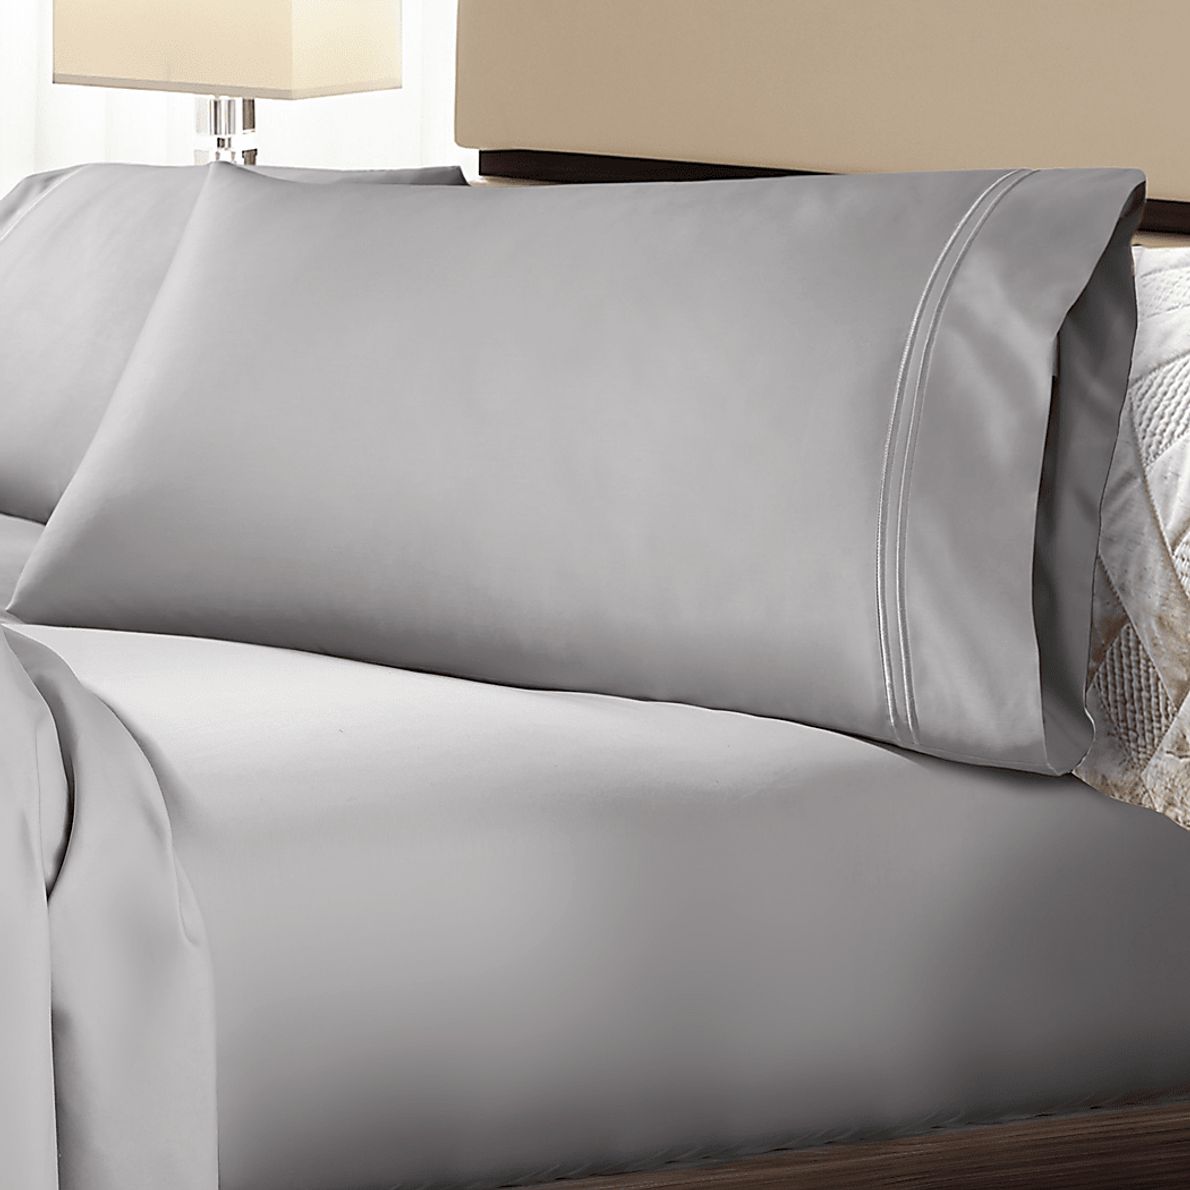 PureCare Premium Soft Touch Dove Gray 4 Pc King Bed Sheet Set